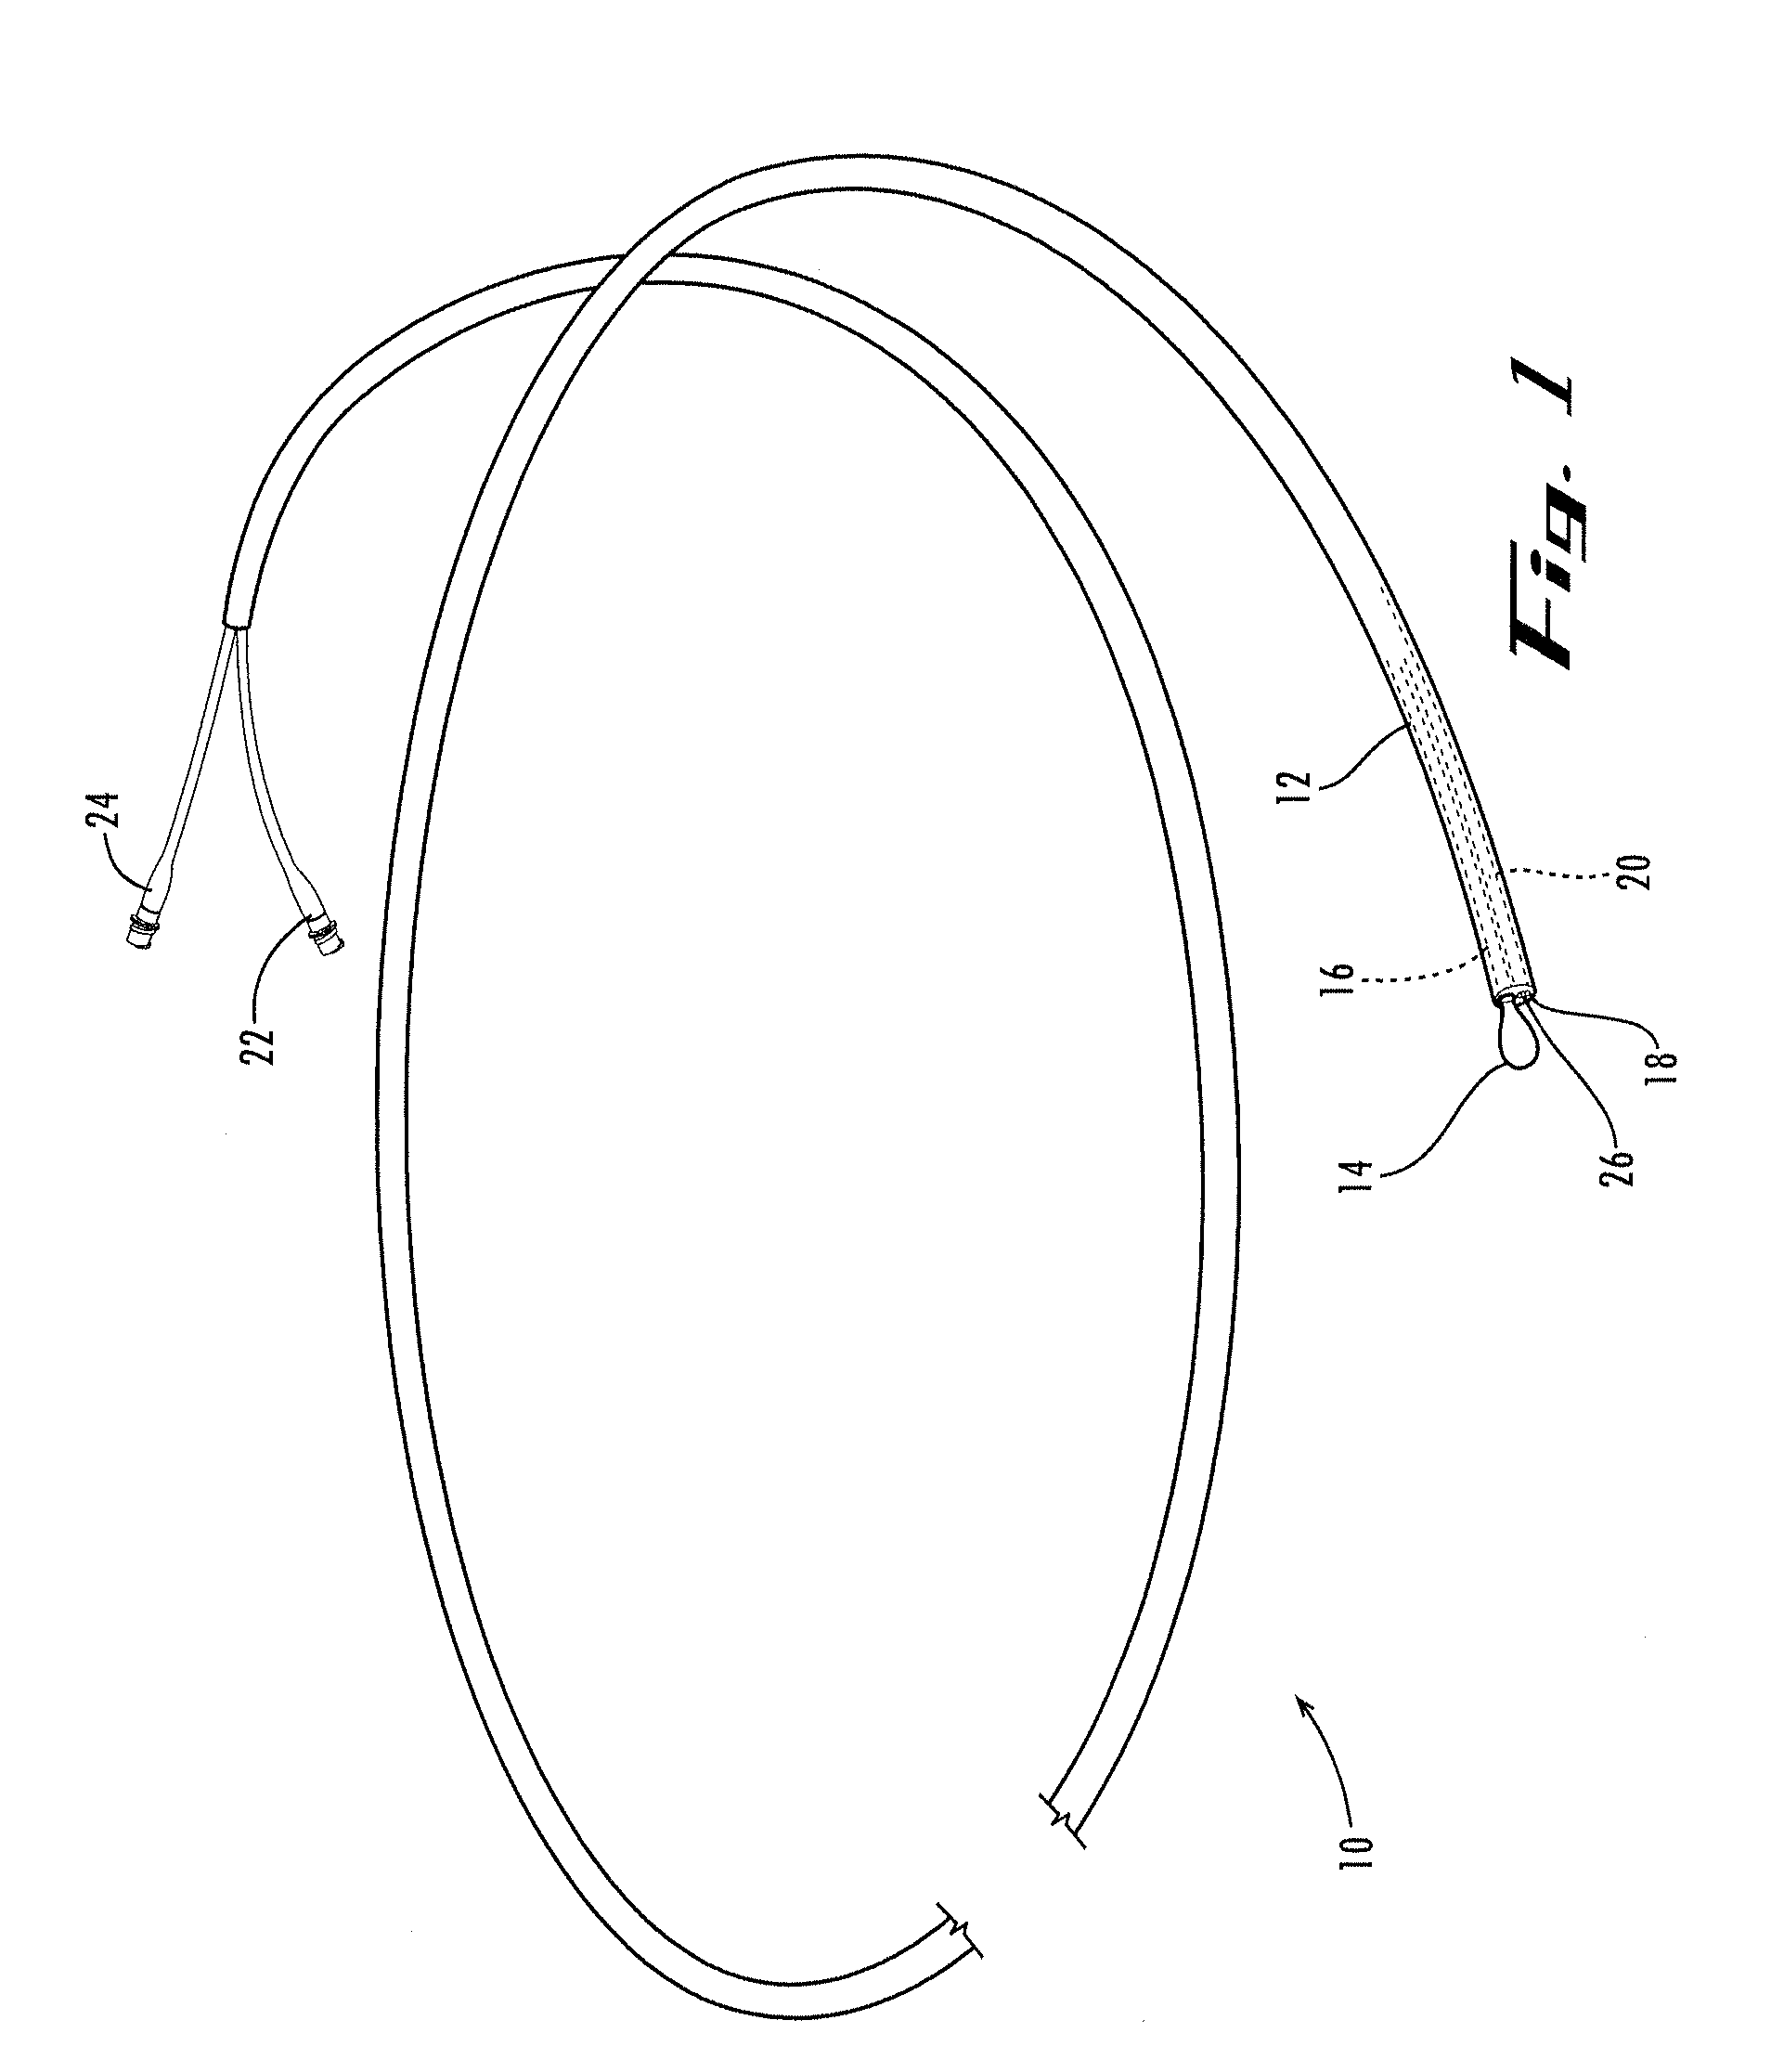 Apparatus and method for displacing tissue obstructions